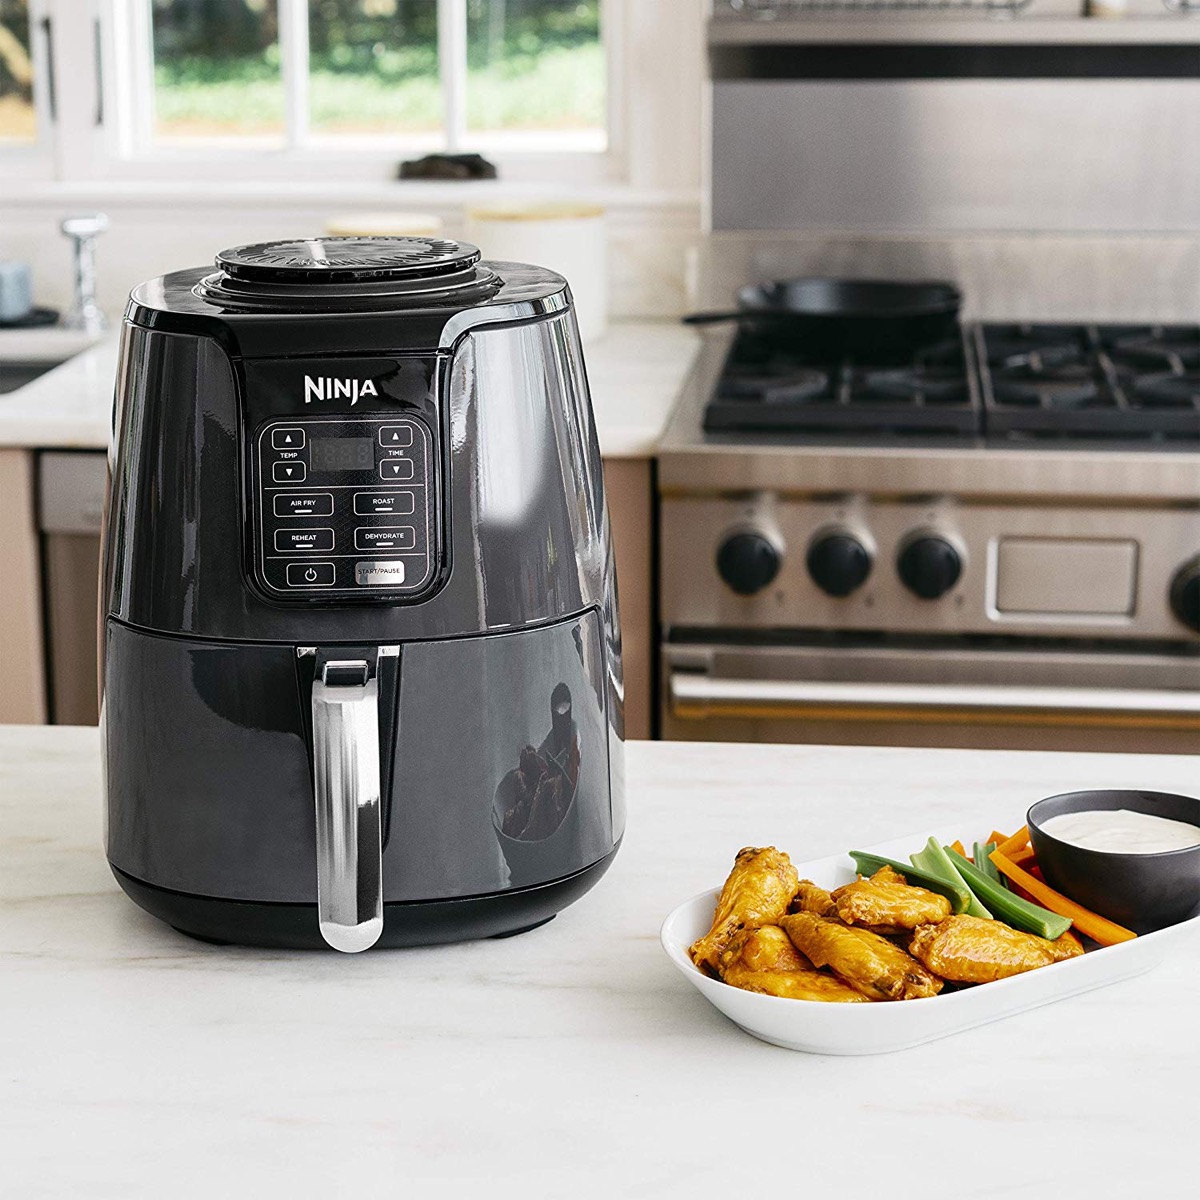 Ninja air fryer on kitchen counter with snacks